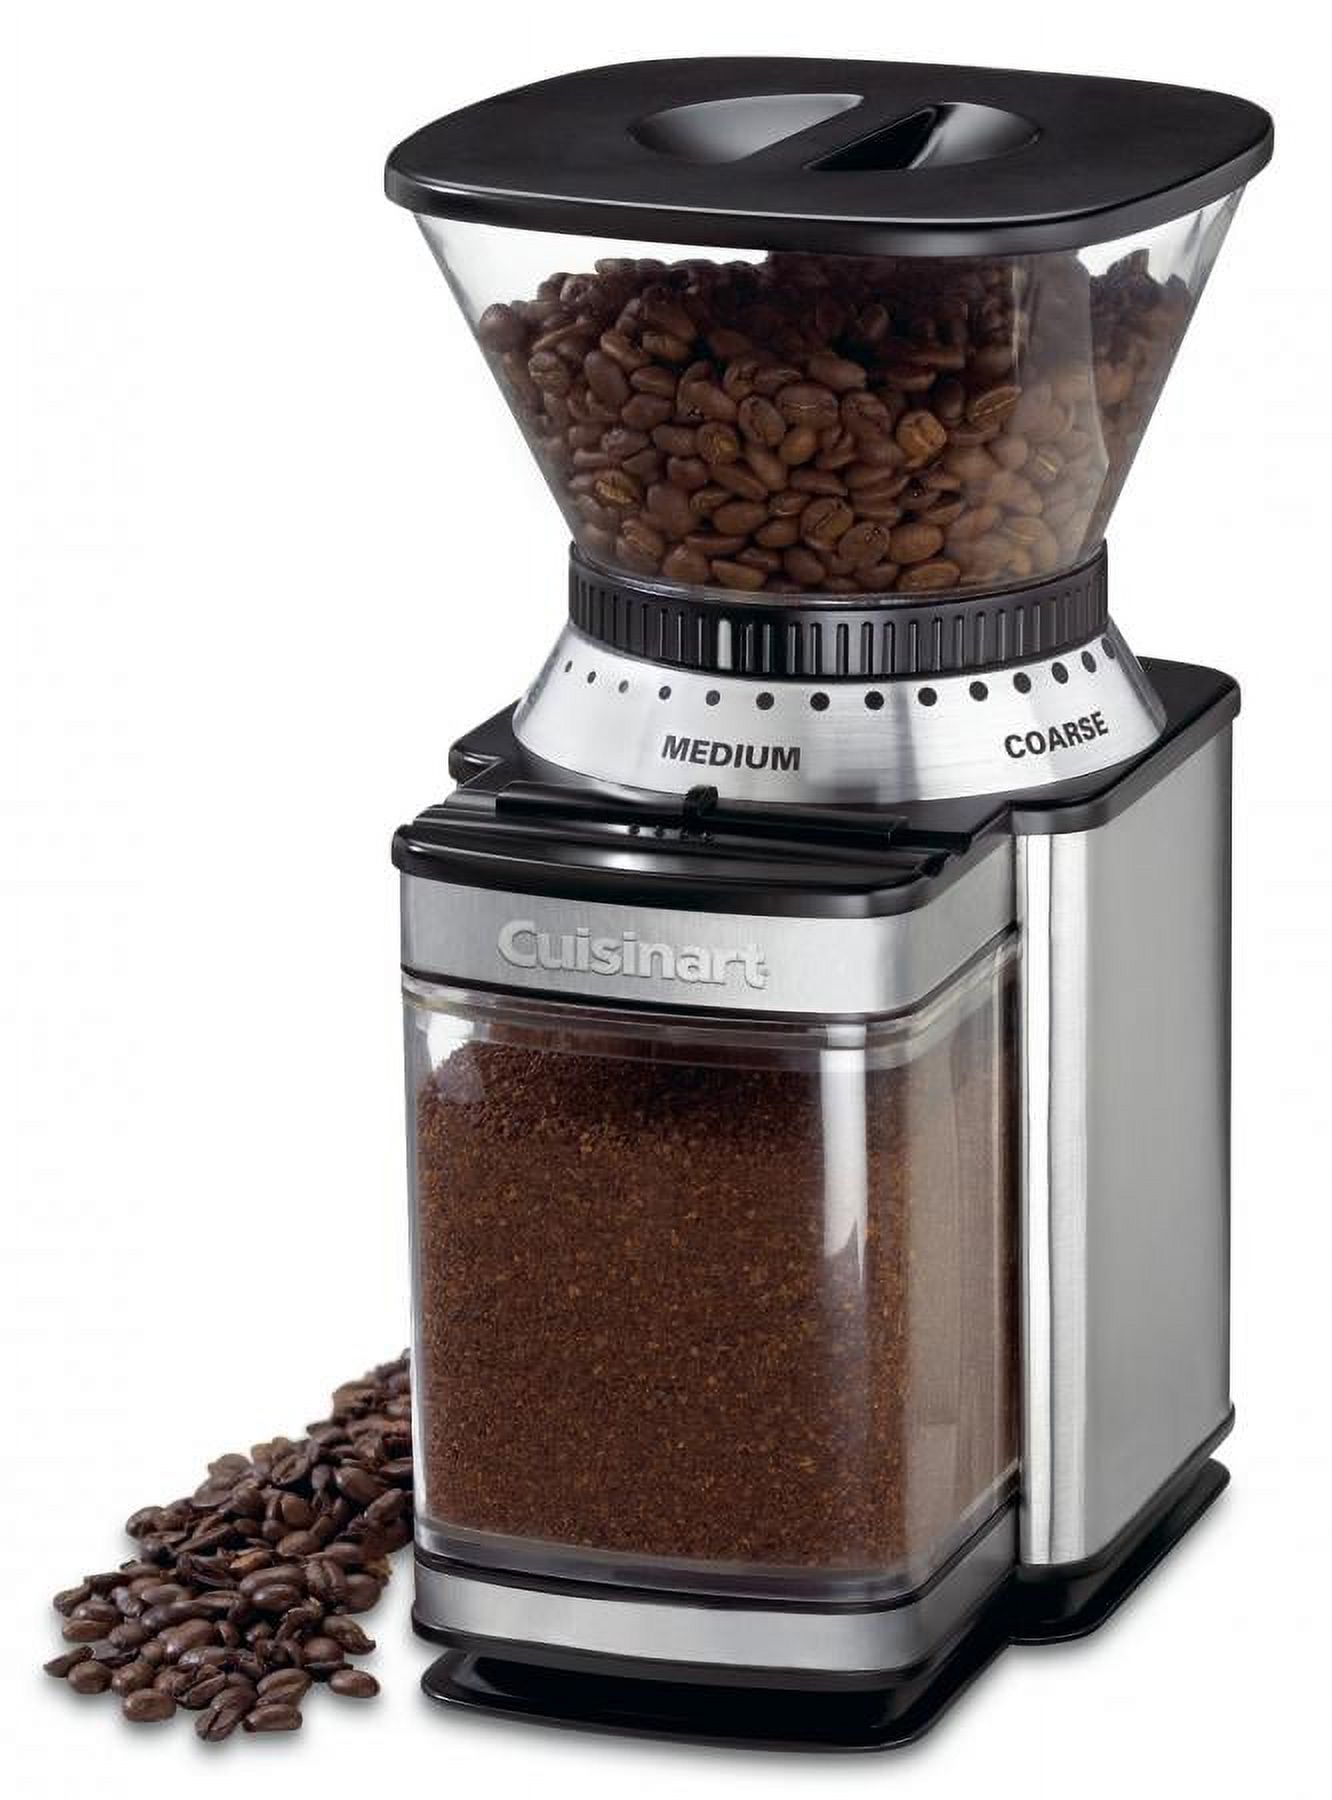 Cuisinart Supreme Grind™ 18 Cup Stainless Steel Burr Coffee Grinder - image 1 of 10